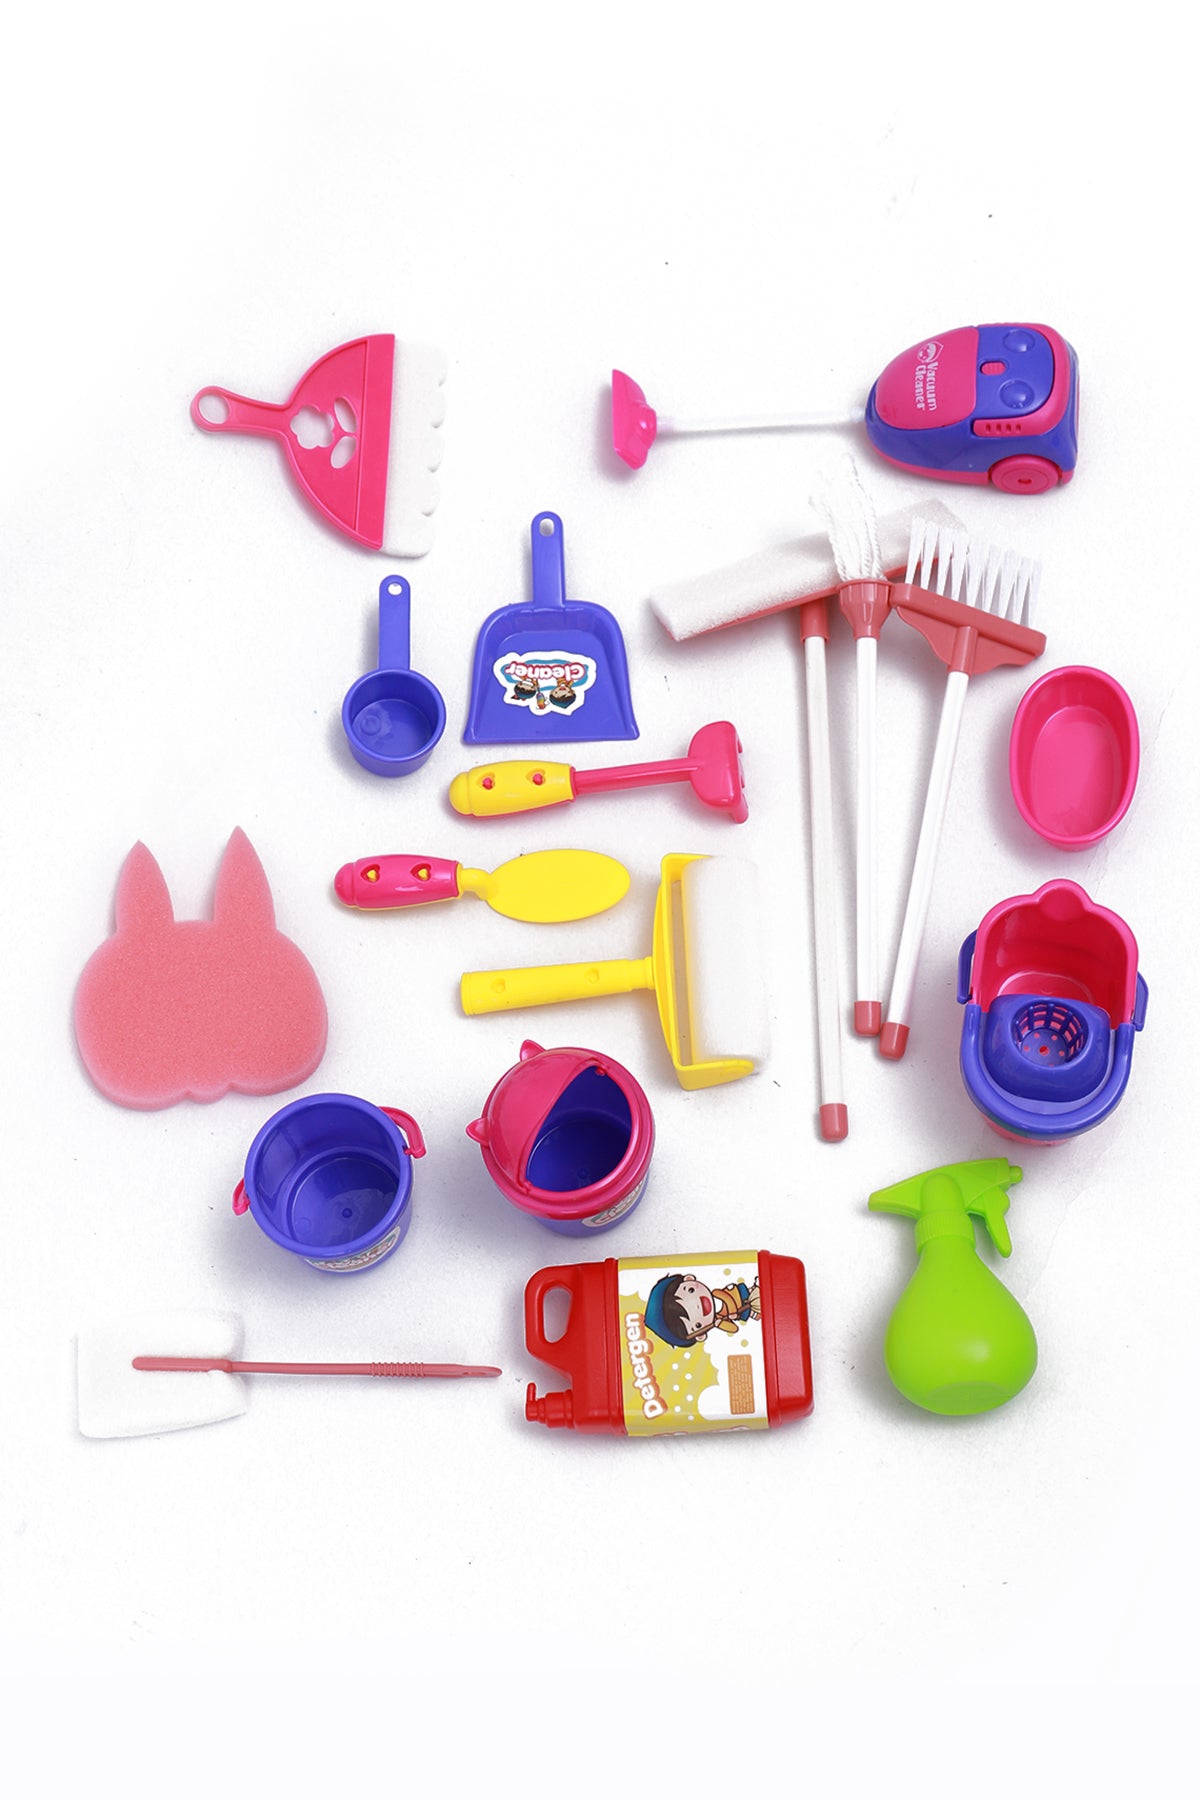 Lol Clean Family Play Set For Kids